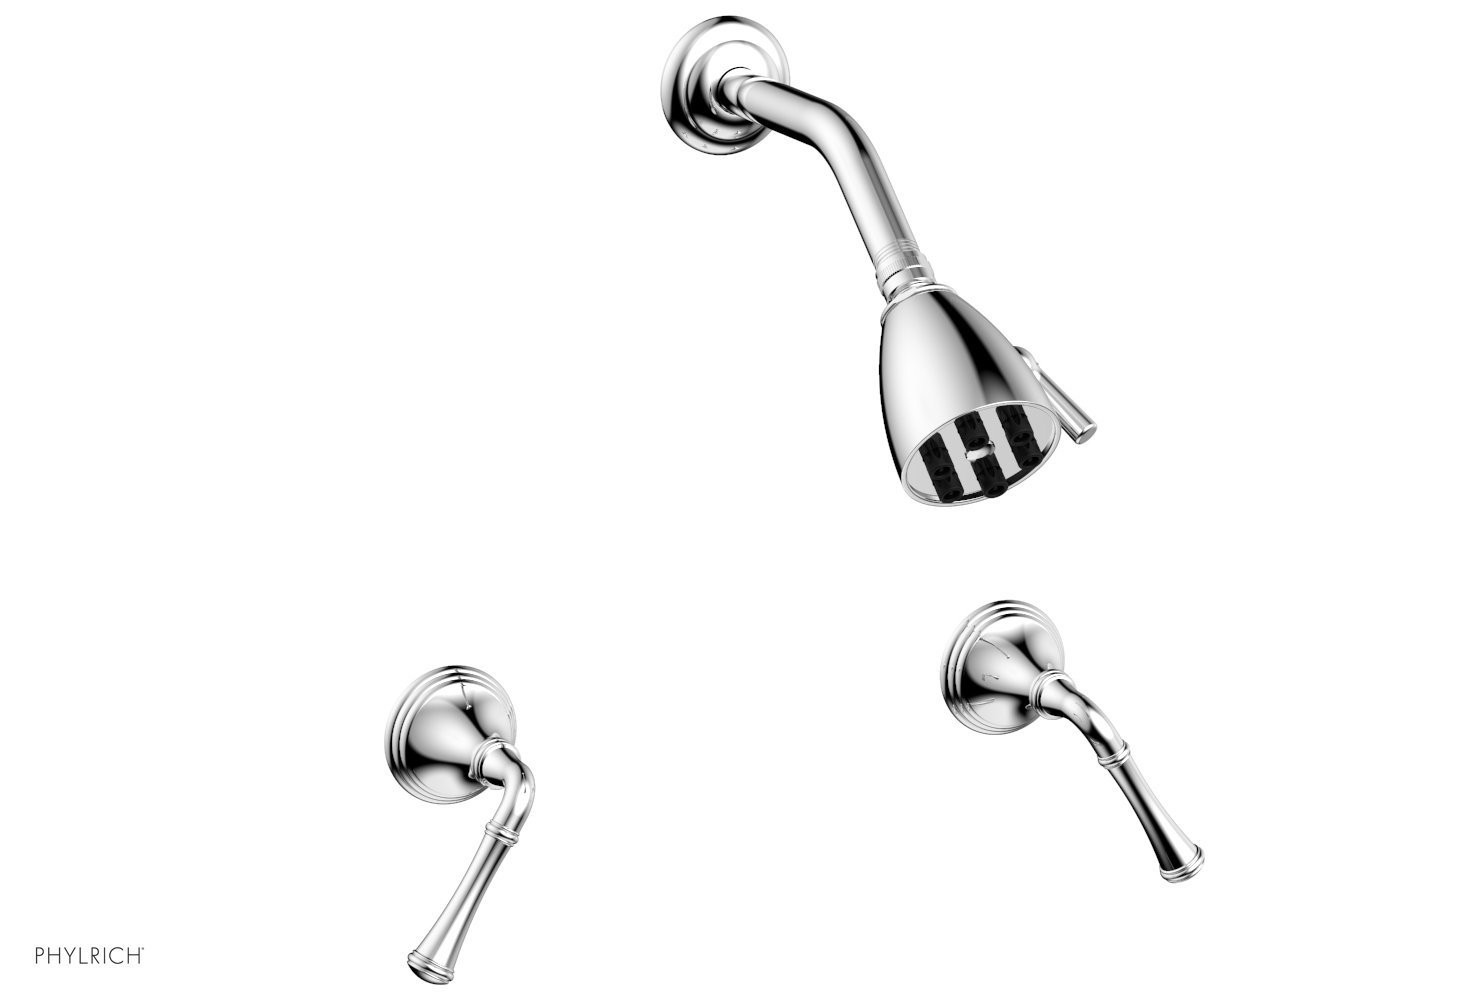 PHYLRICH D3205 3RING WALL MOUNT SHOWER SET WITH TWO STRAIGHT LEVER HANDLES